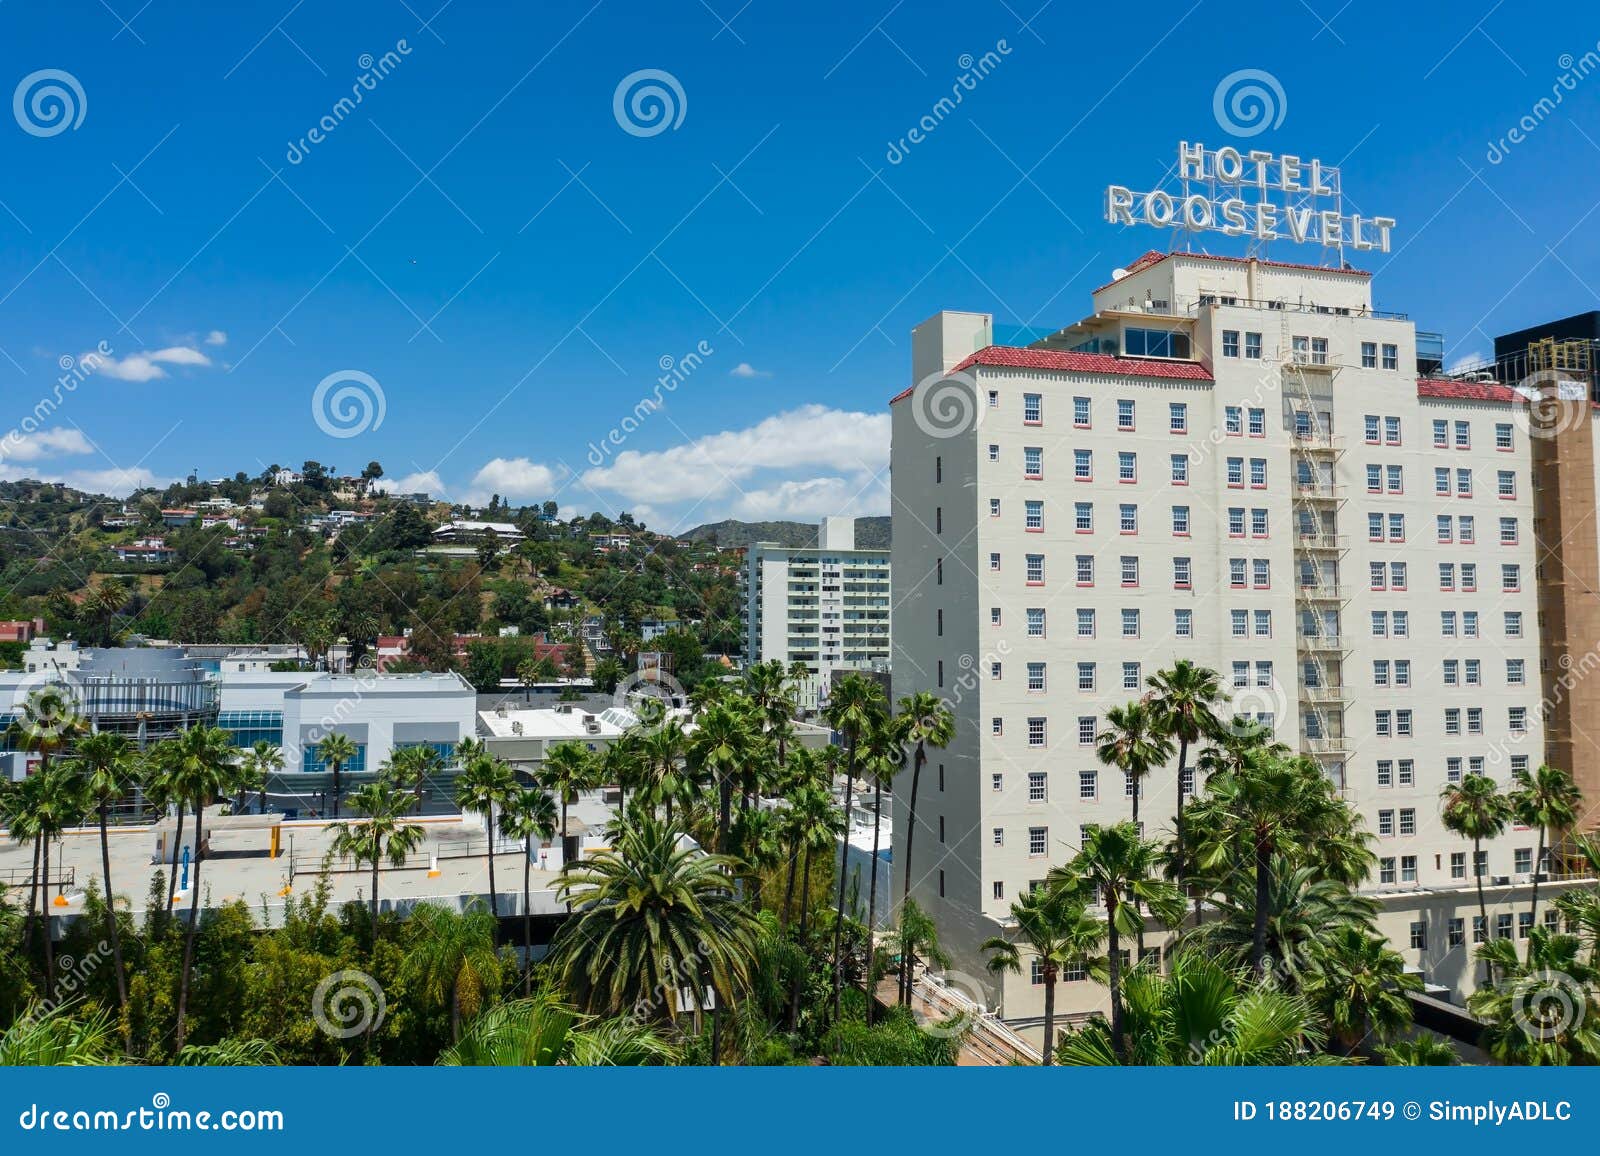 aerial view of roosevelt hotel in a heart of hollywood in california